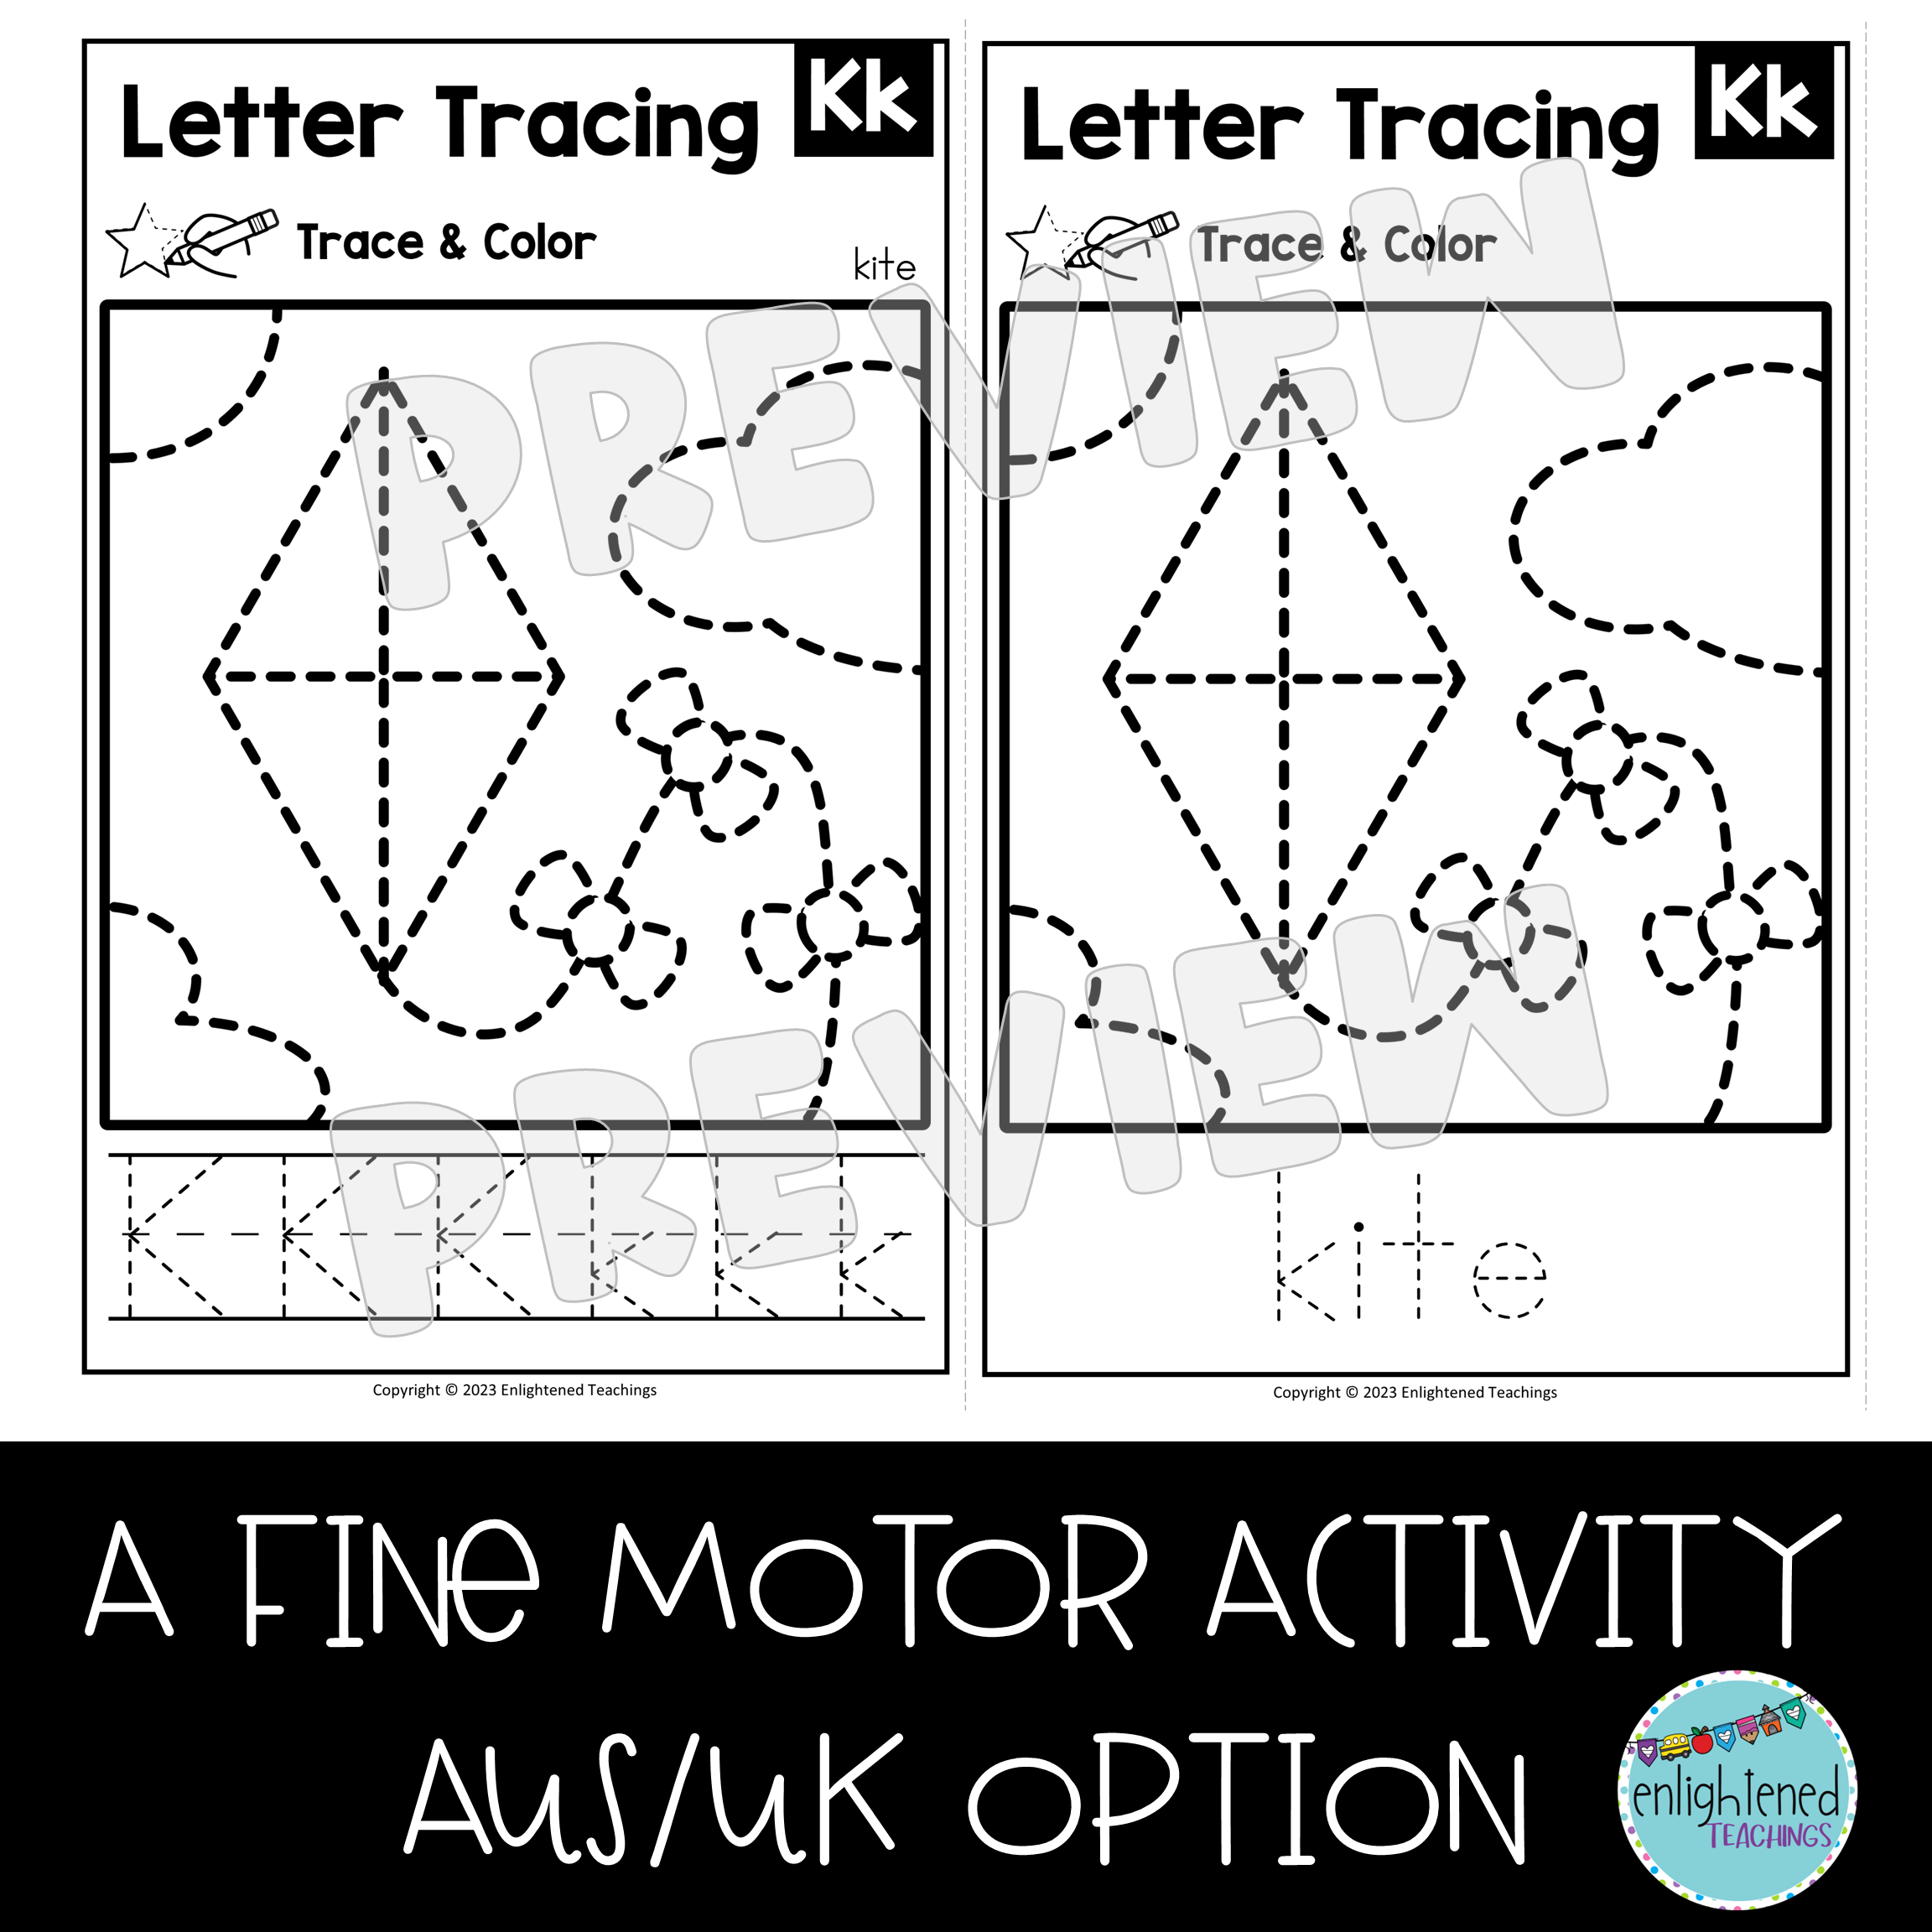 Letter k tracing worksheets letter tracing mats letter k trace color made by teachers